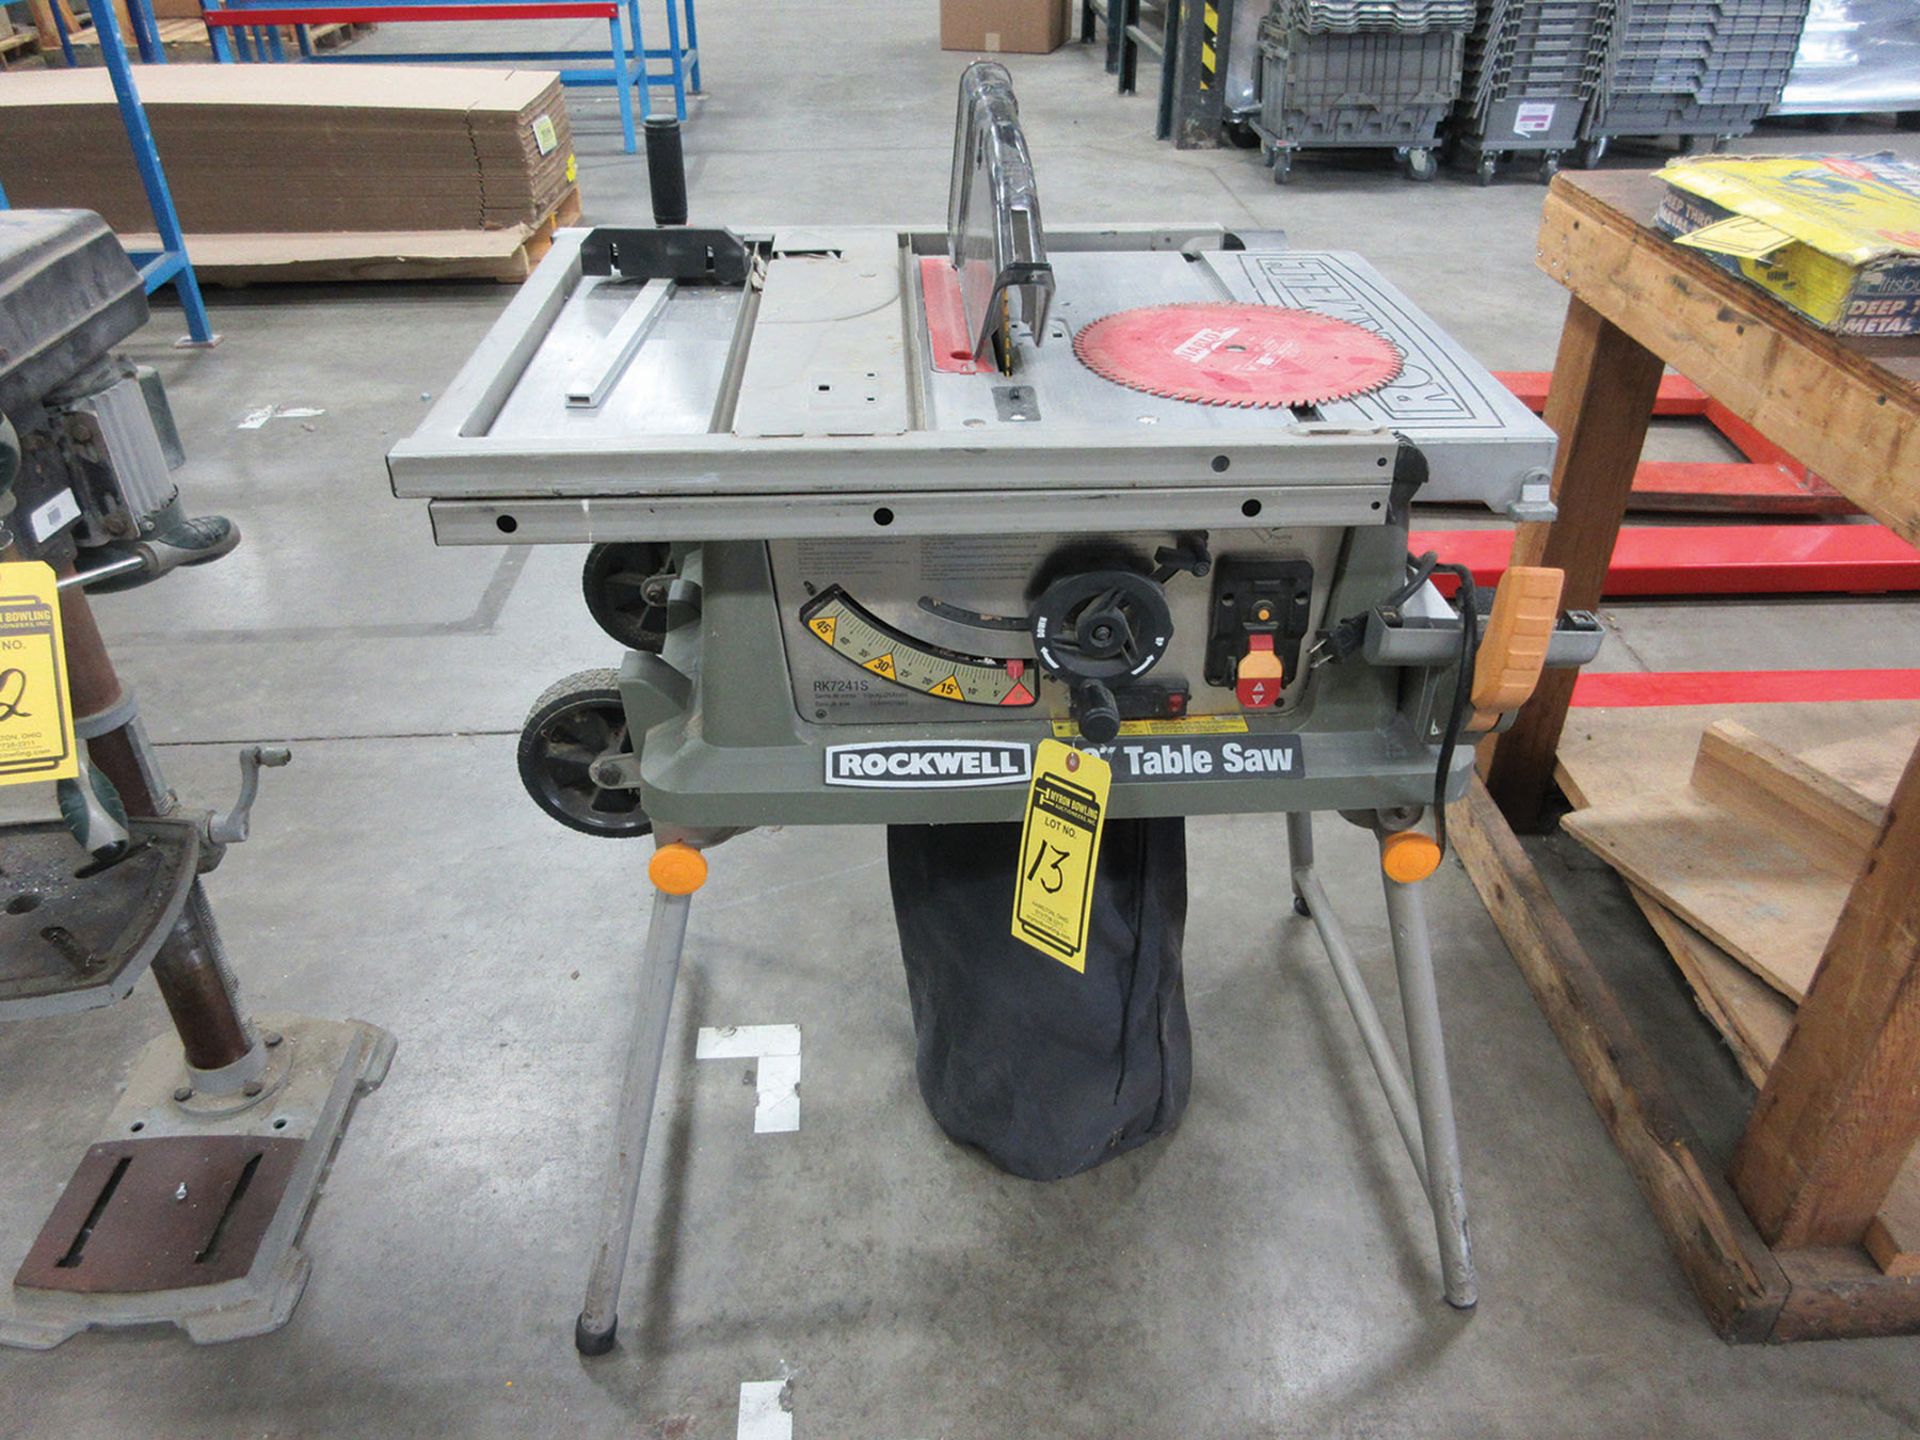 ROCKWELL 10'' TABLE SAW; MODEL RK7241S, LASER GUIDE, S/N 201203